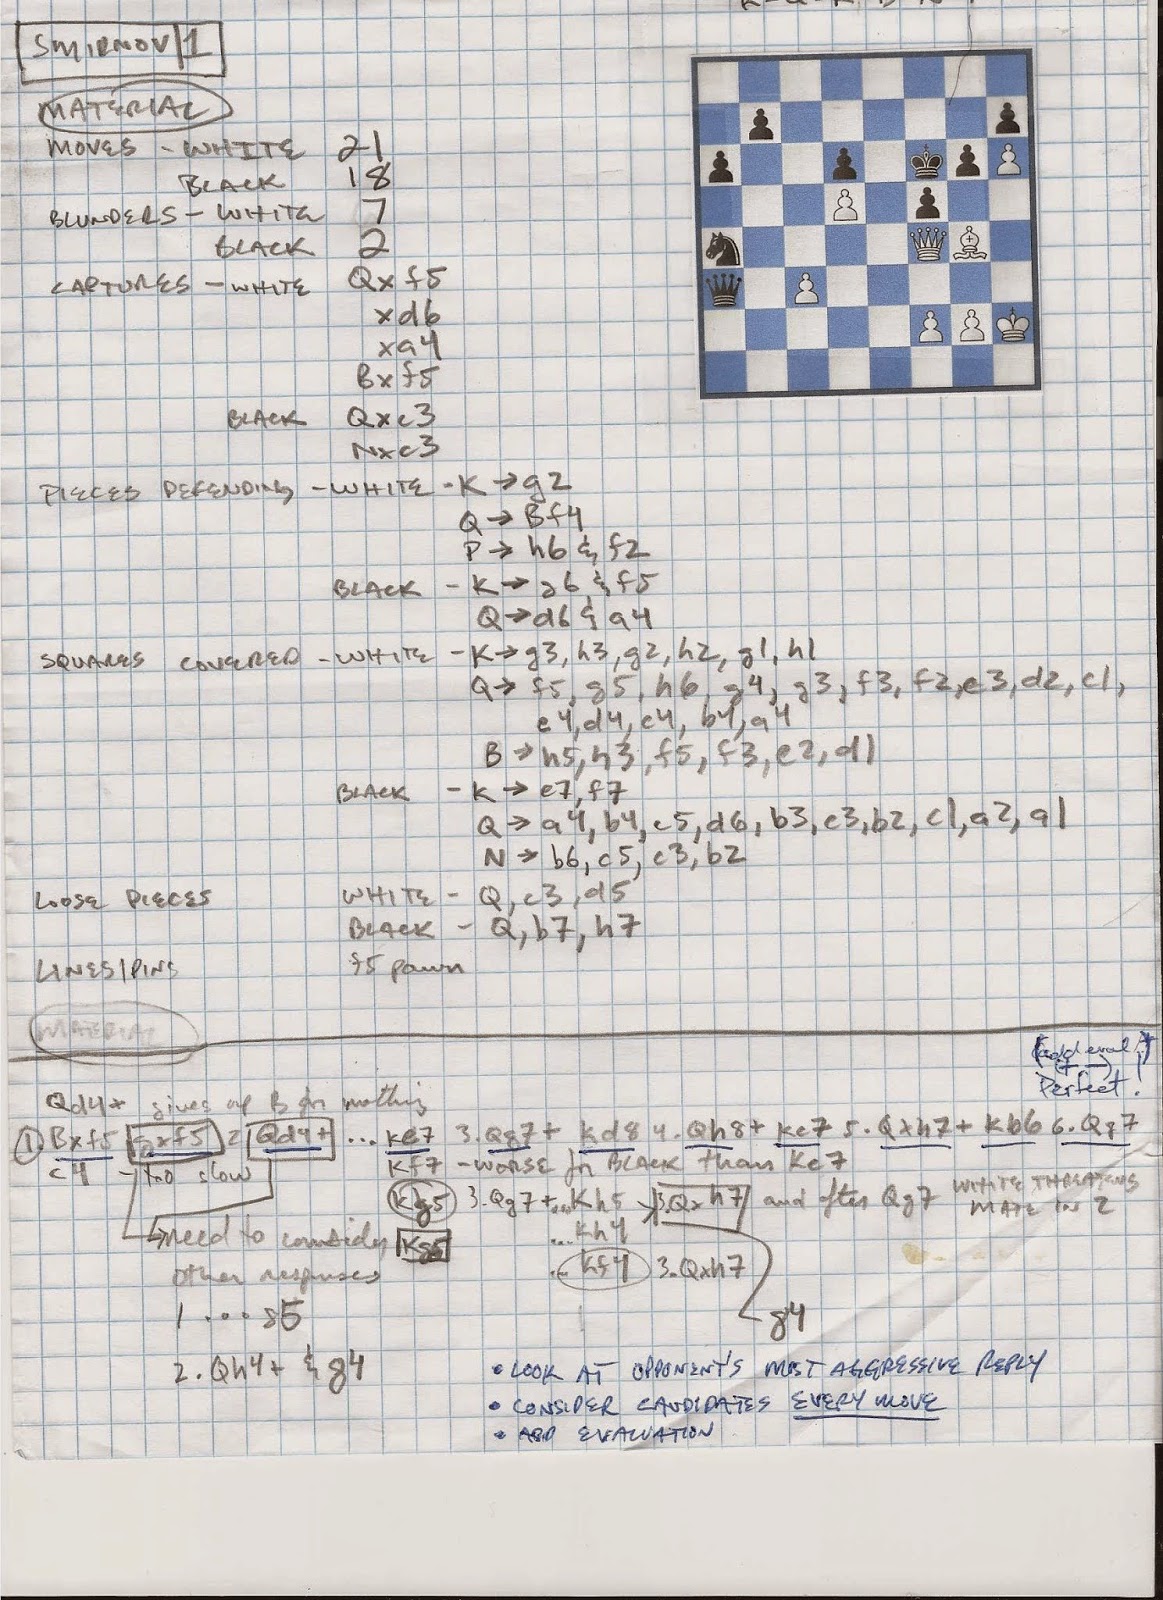 4 Important Elements of an Effective Chess Calculation Technique